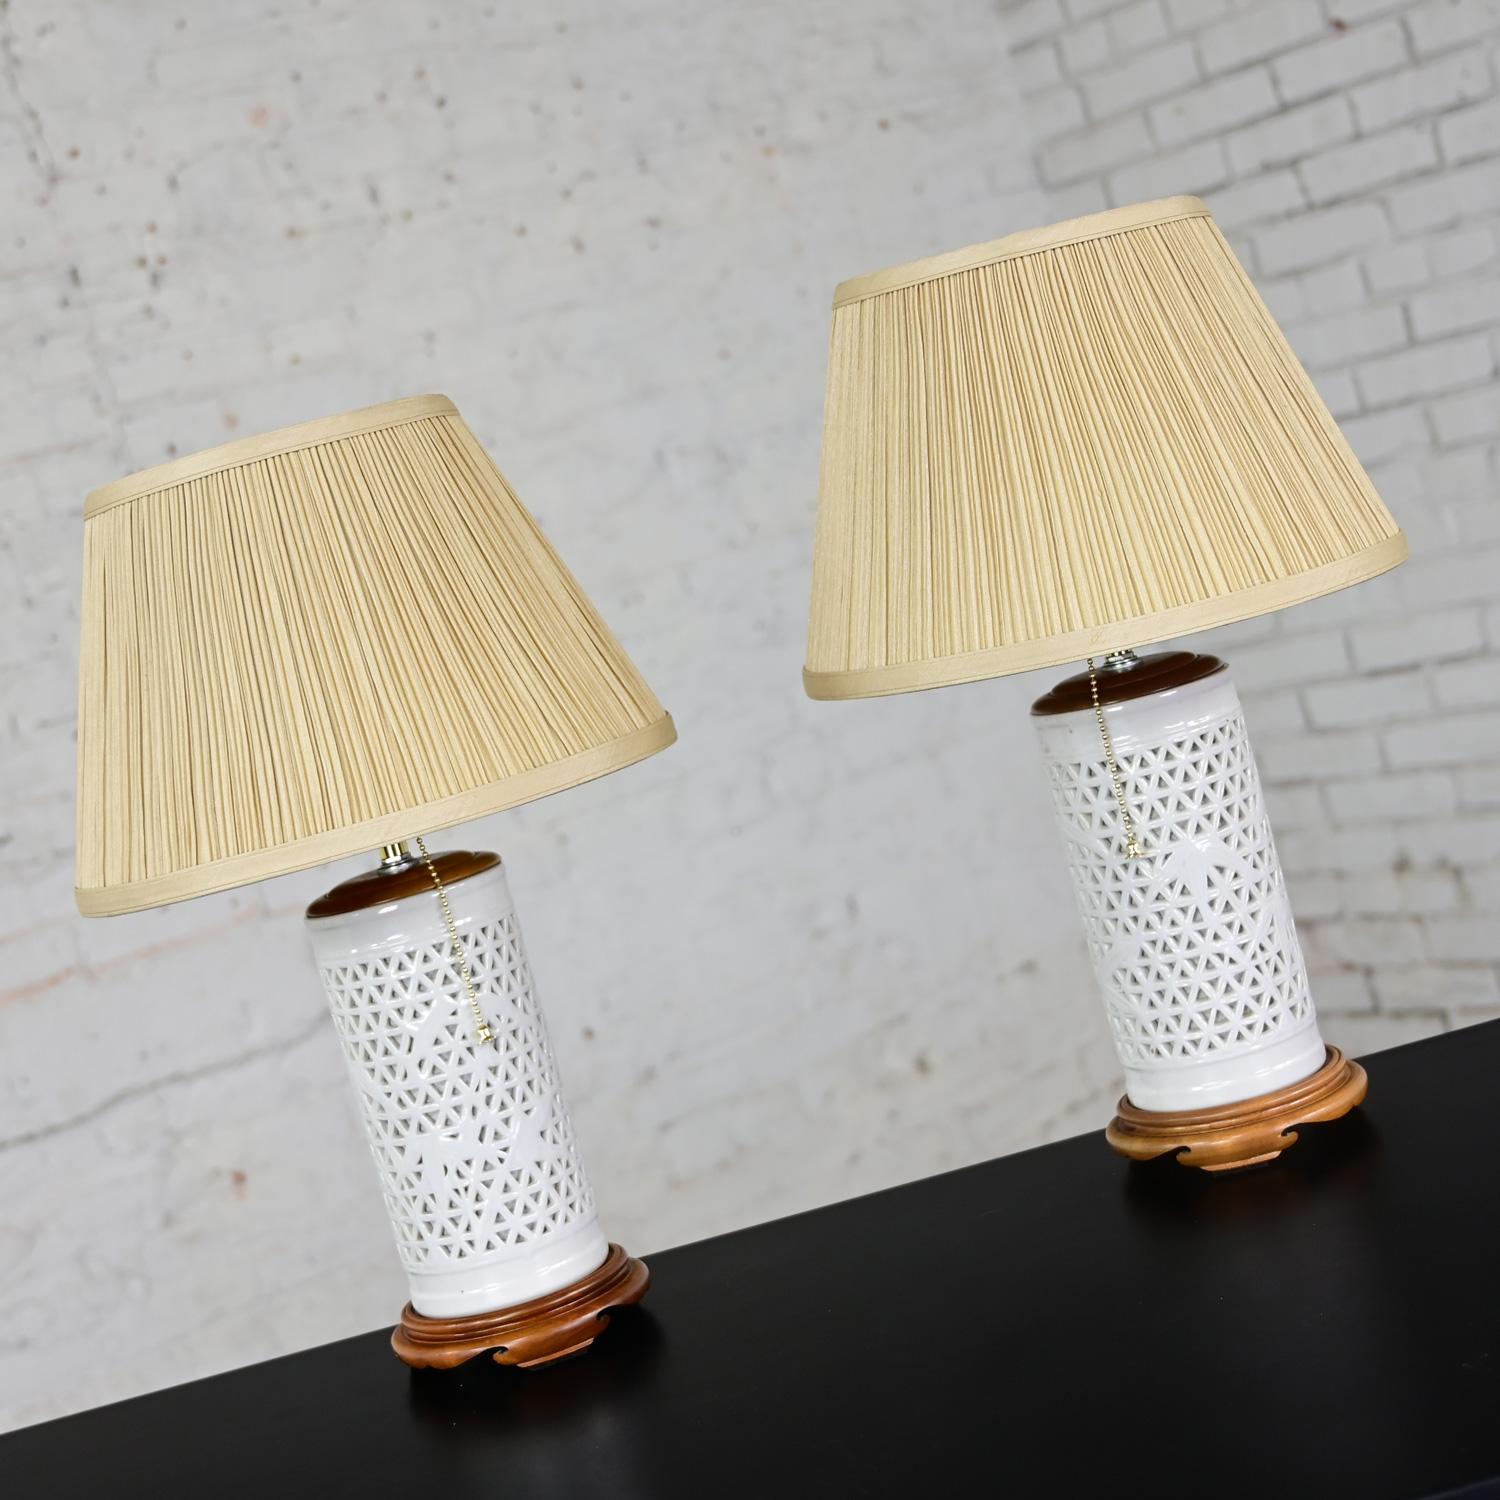 Impeccable Mid-20th Century Chinoiserie white pierced porcelain Blanc De Chine pair of lamps with new Ecru colored tapered & pleated silk-like shades with a hard paper inner liner, pull chain switch, and medium tone stained wood top & base.